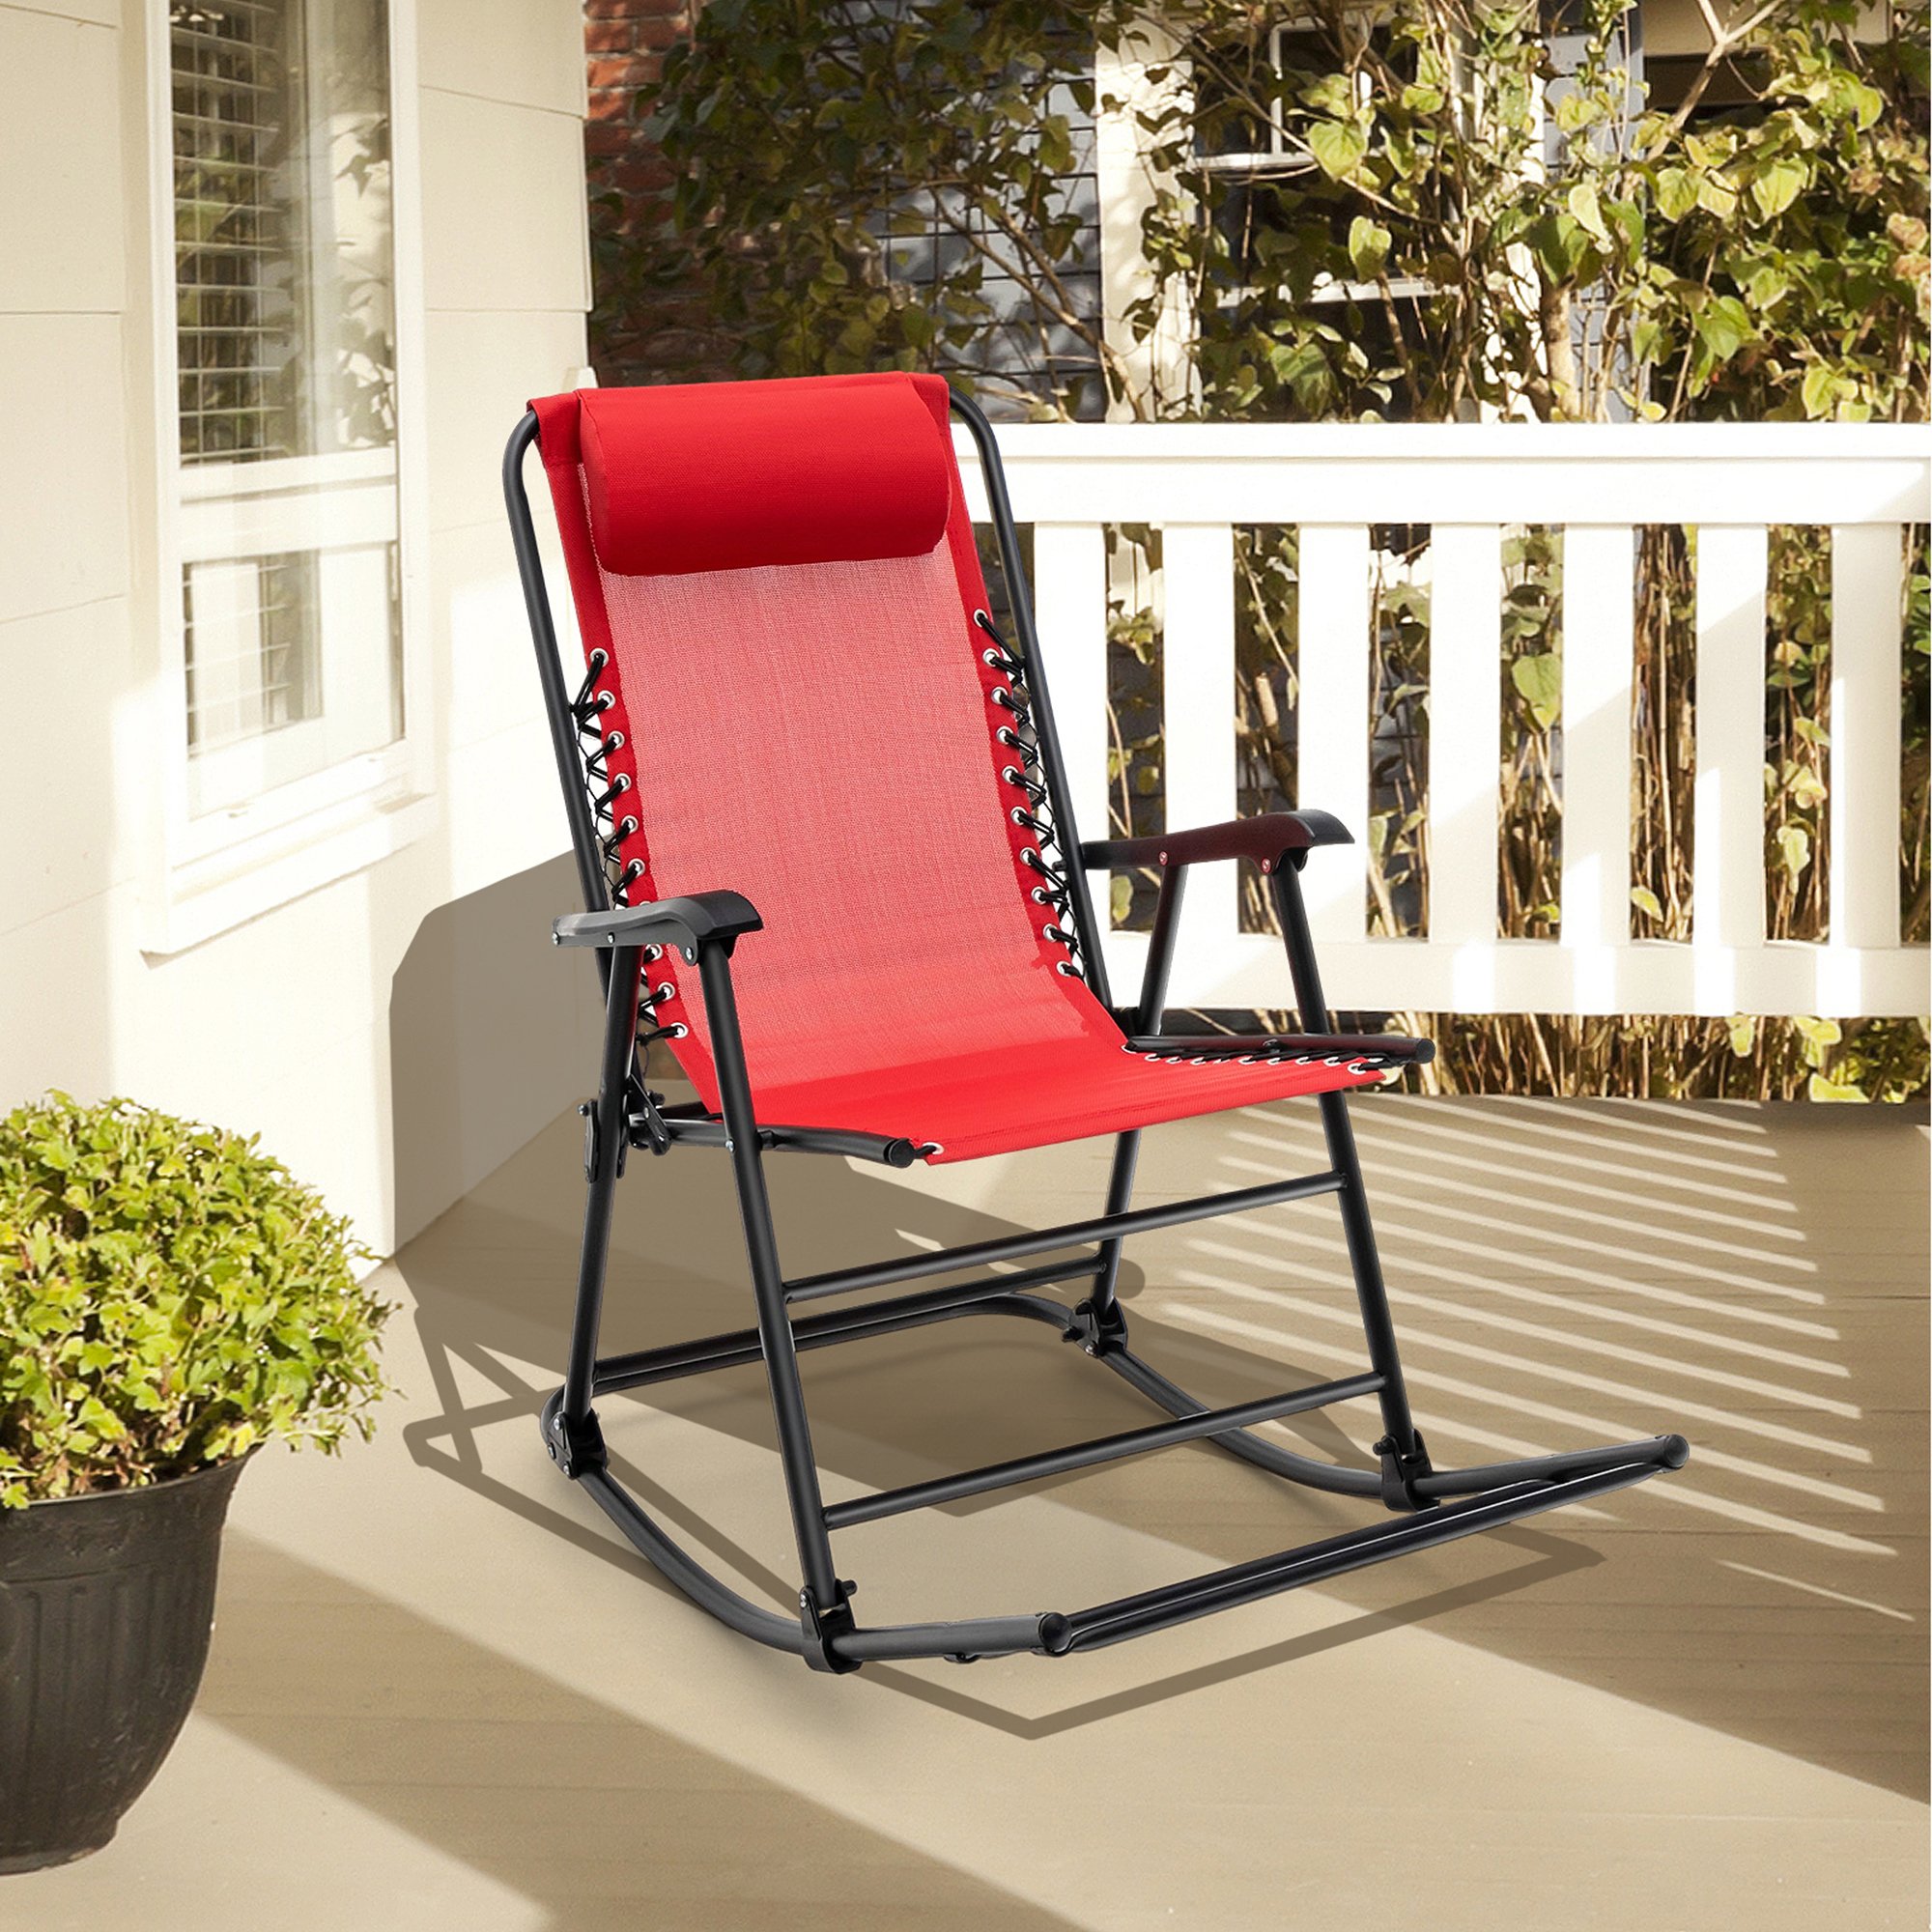 Gymax 2PCS Patio Folding Rocking Chair Outdoor Portable Lounge Rocker Red - image 4 of 10